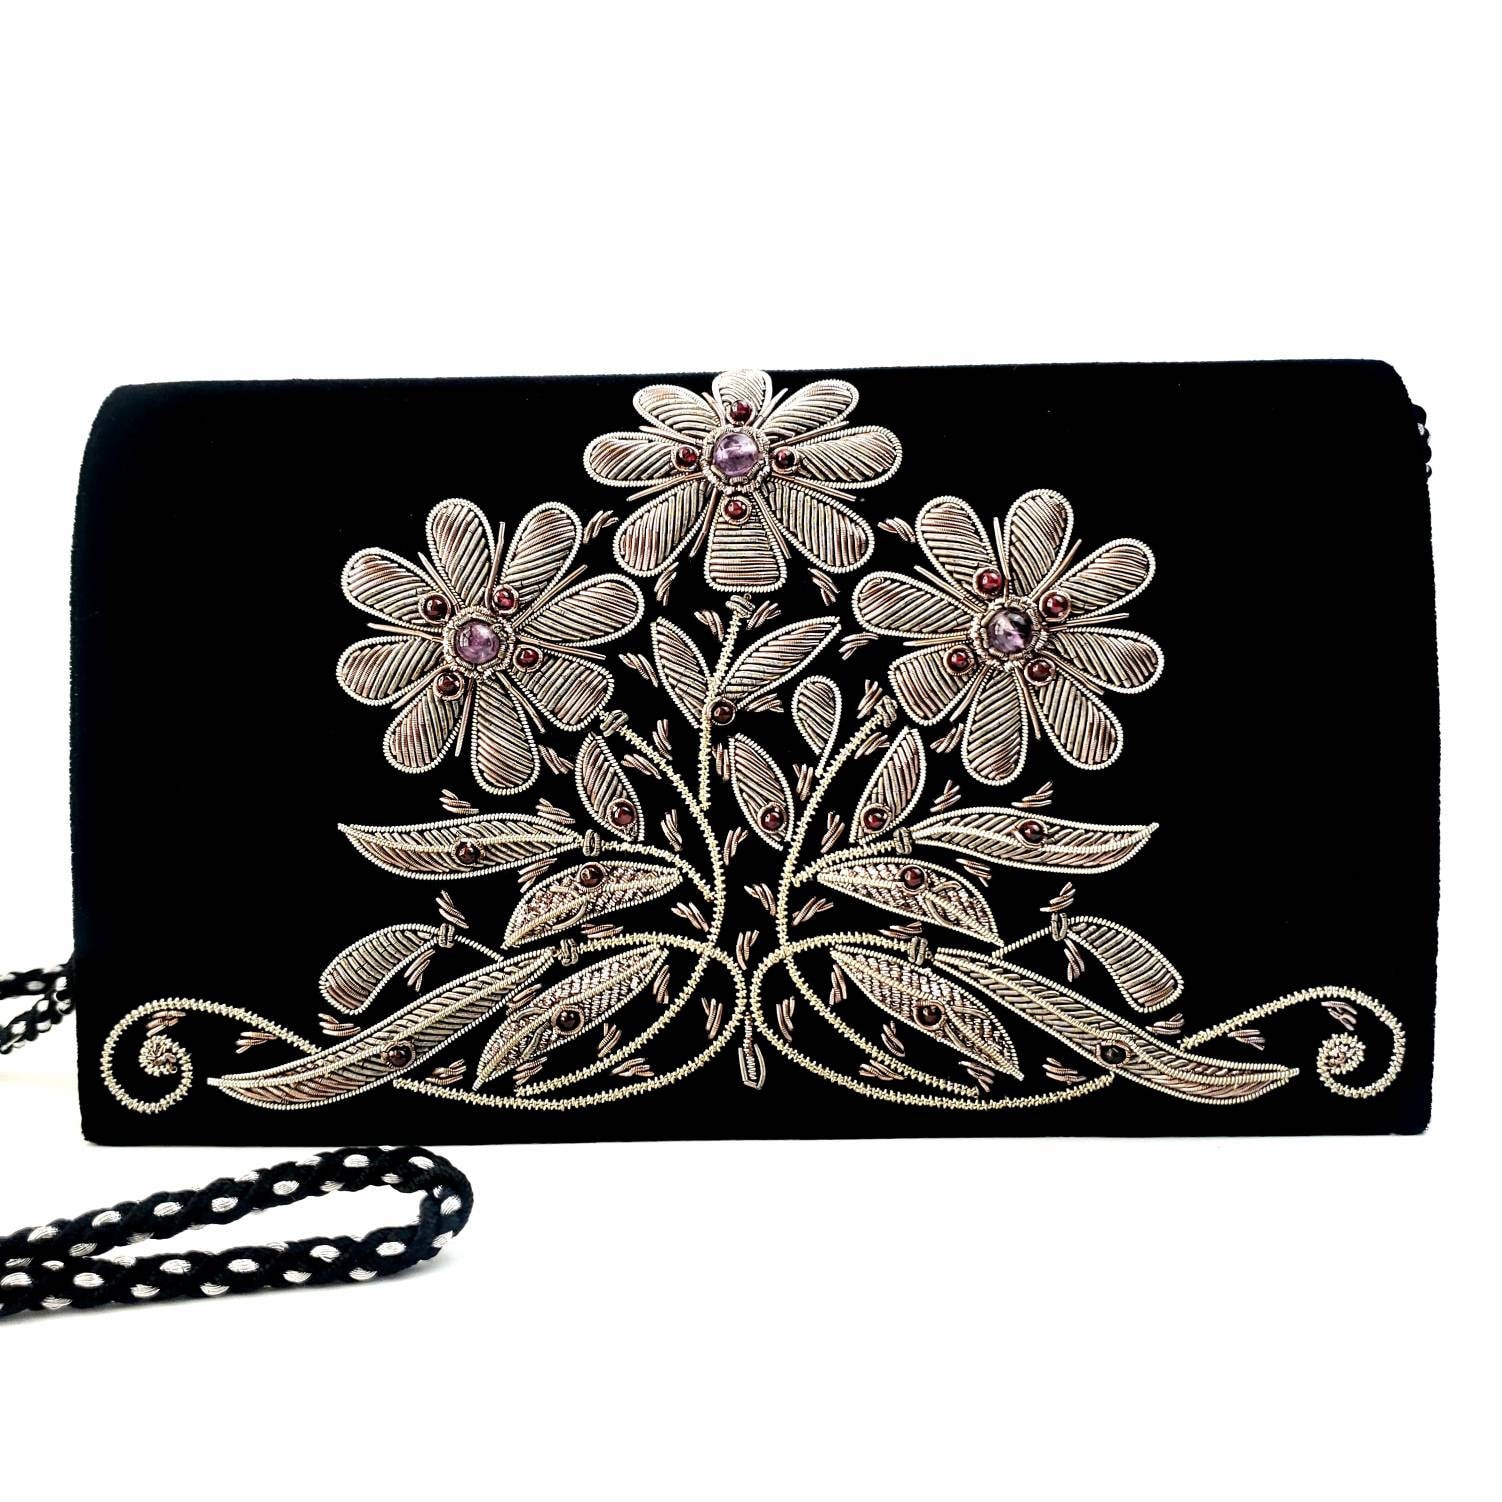 Luxury black velvet evening bag embroidered with antique silver